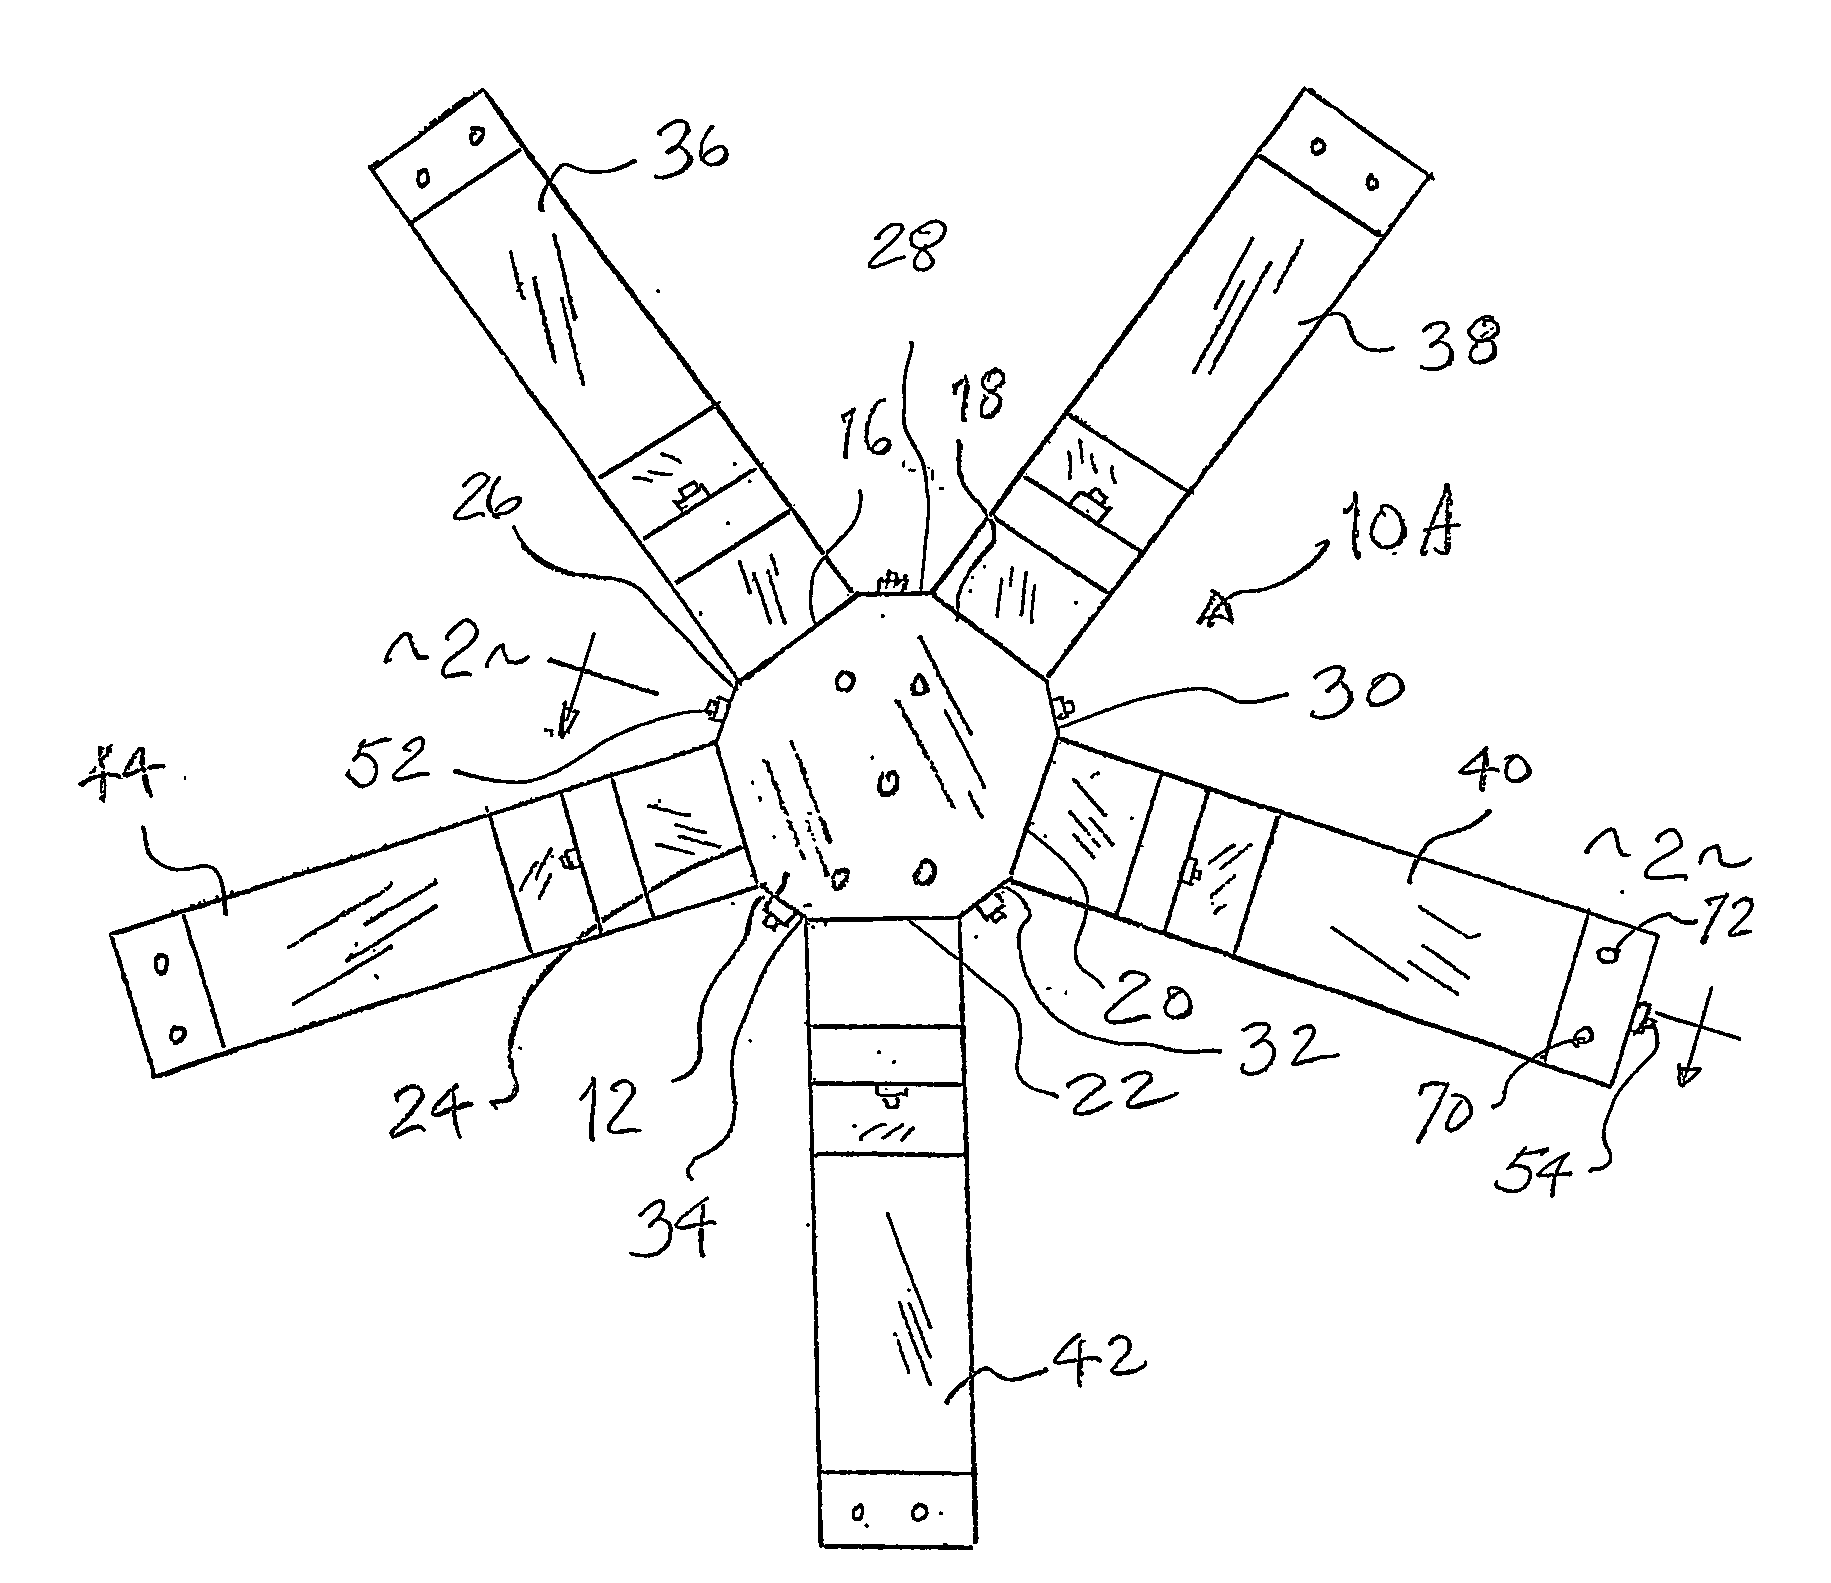 Support for an upright structure